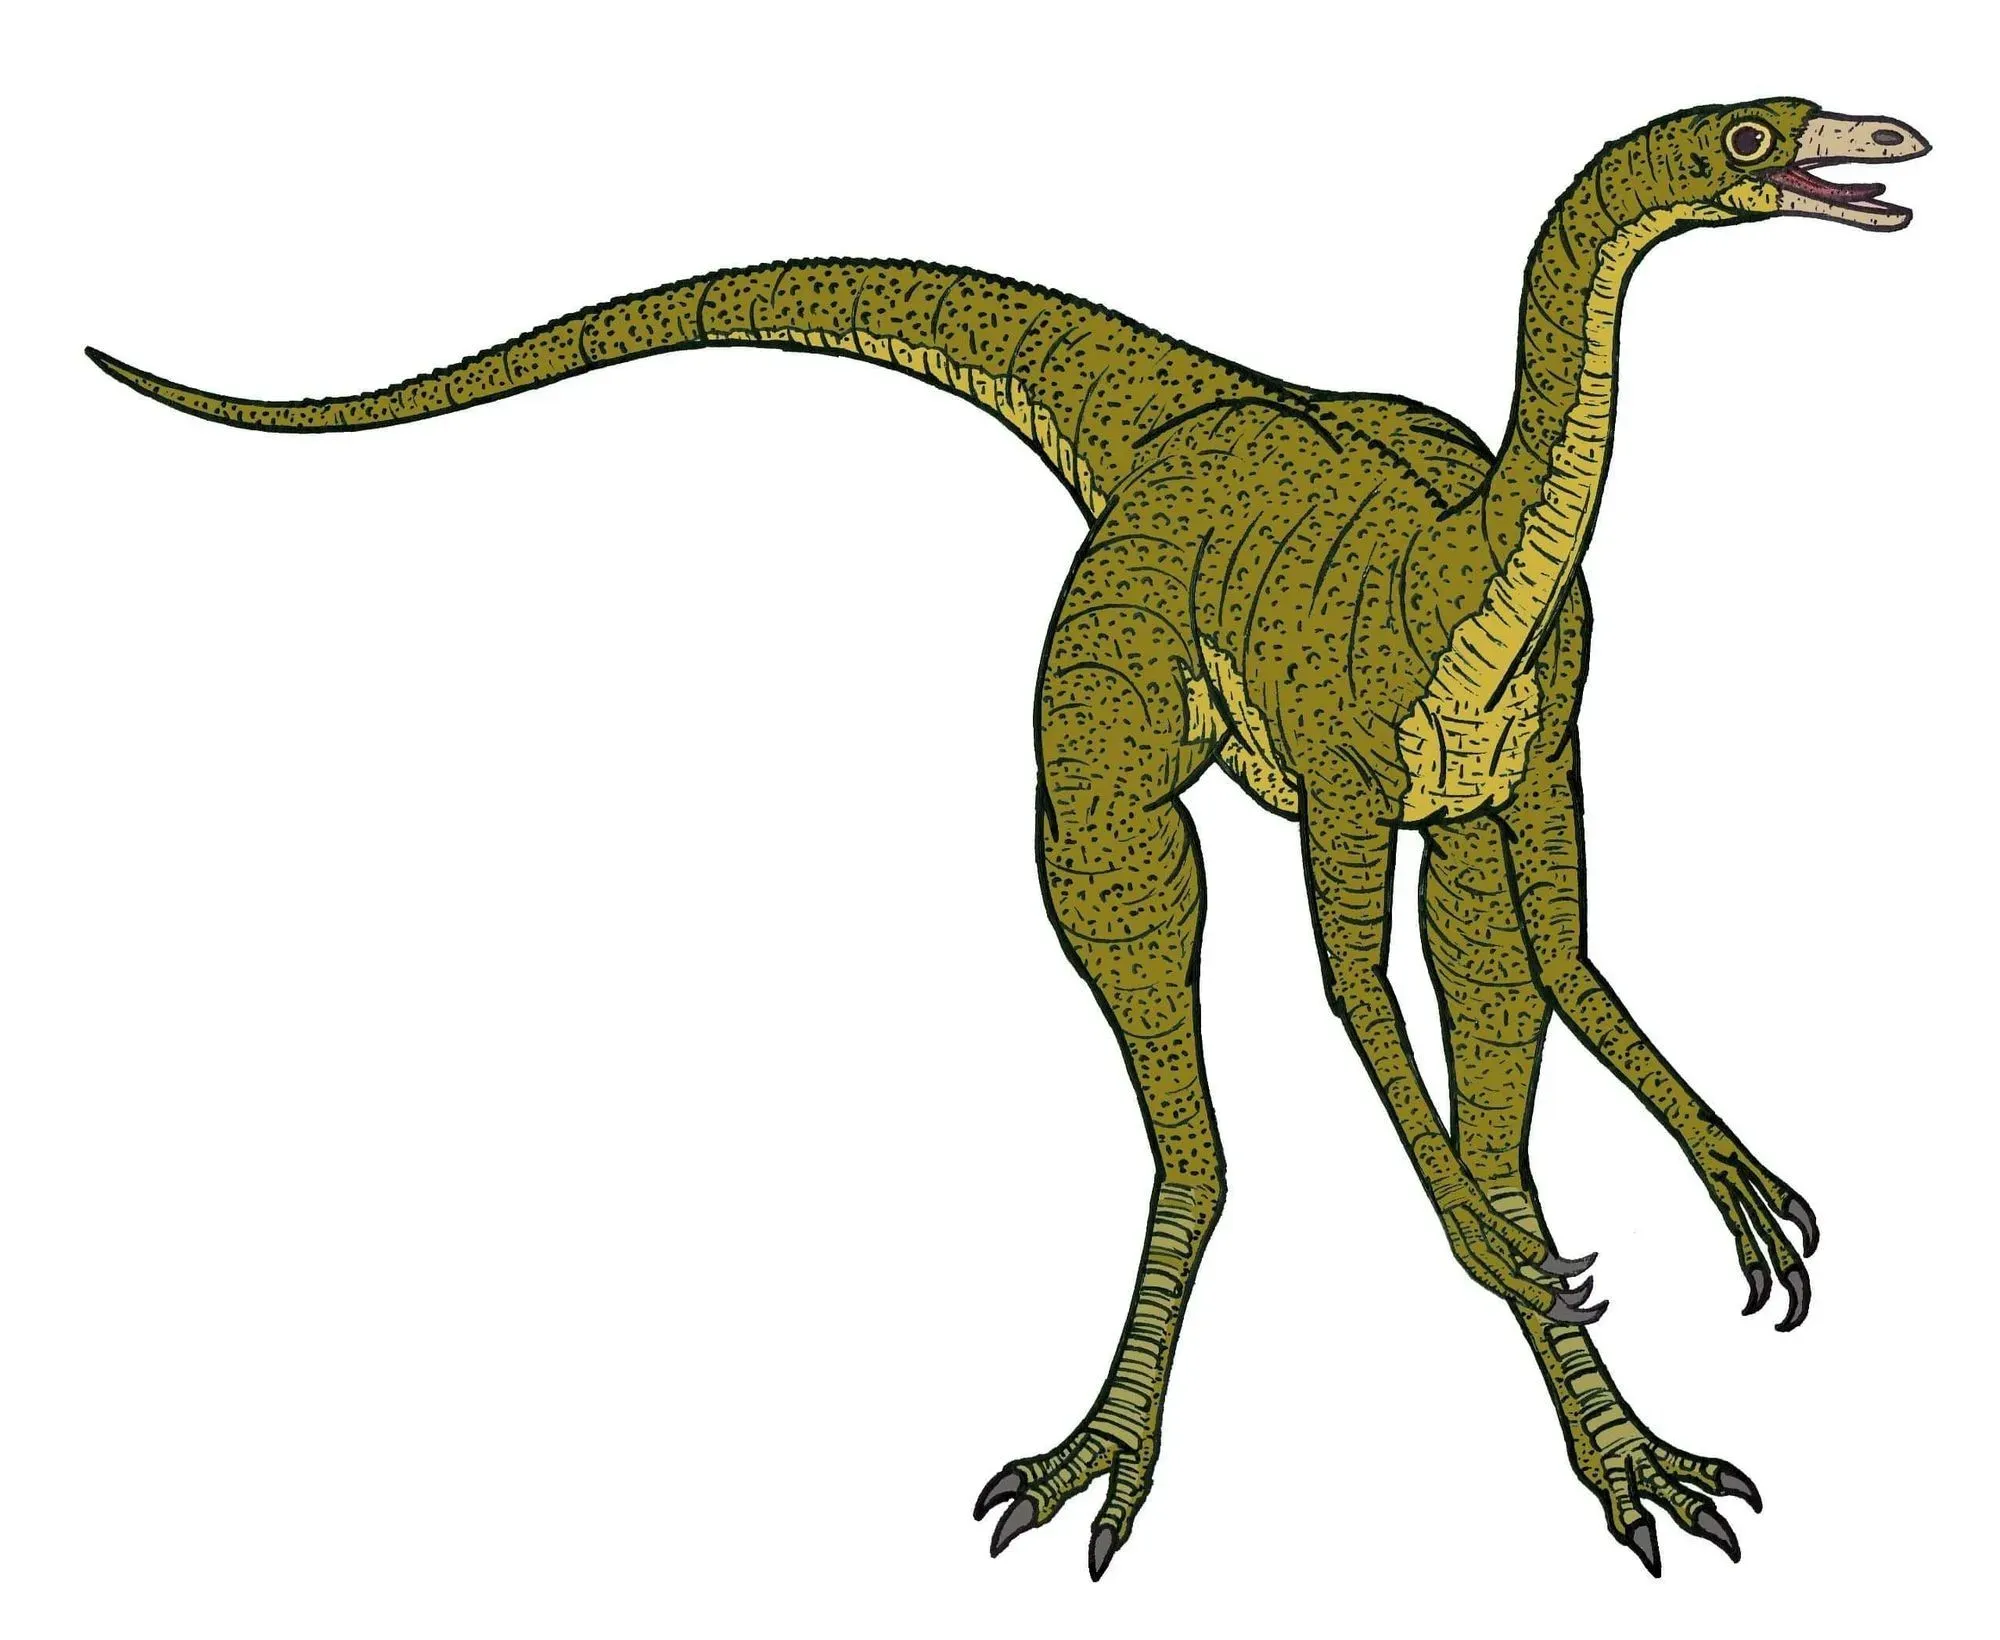 Struthiomimus facts are interesting.